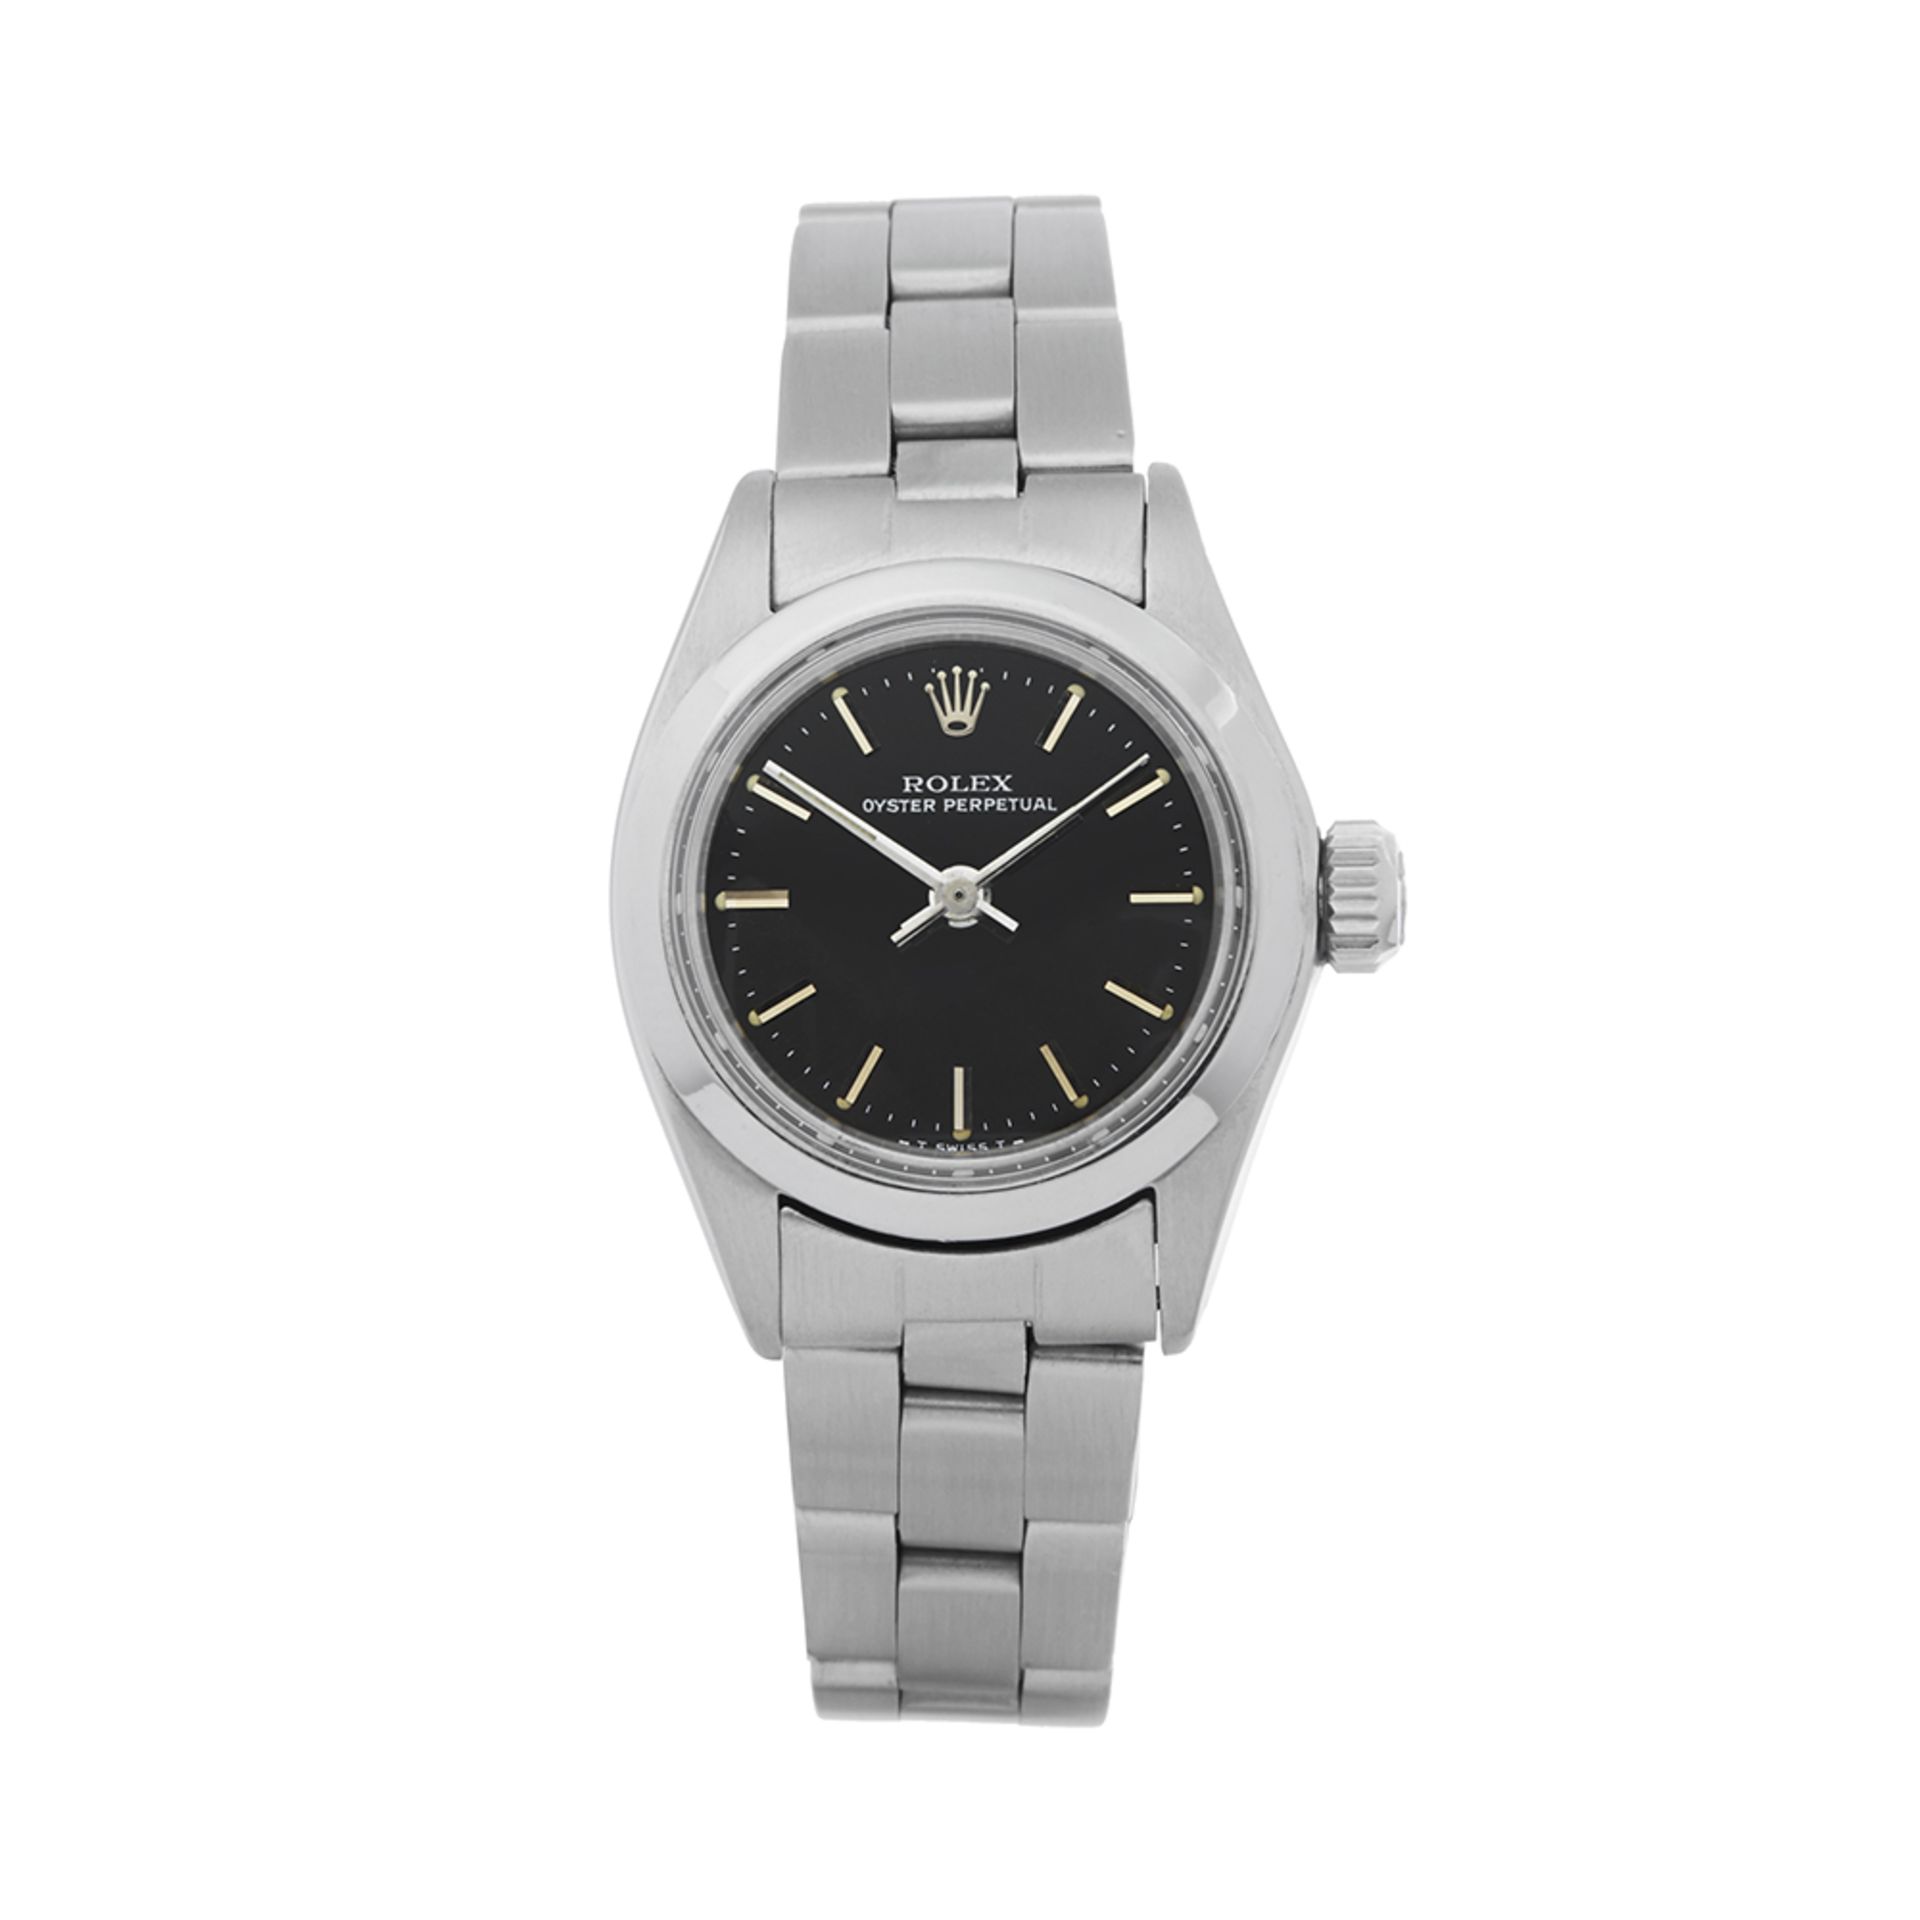 1976 Rolex Oyster Perpetual 26 Stainless Steel - 6718 - Image 10 of 10